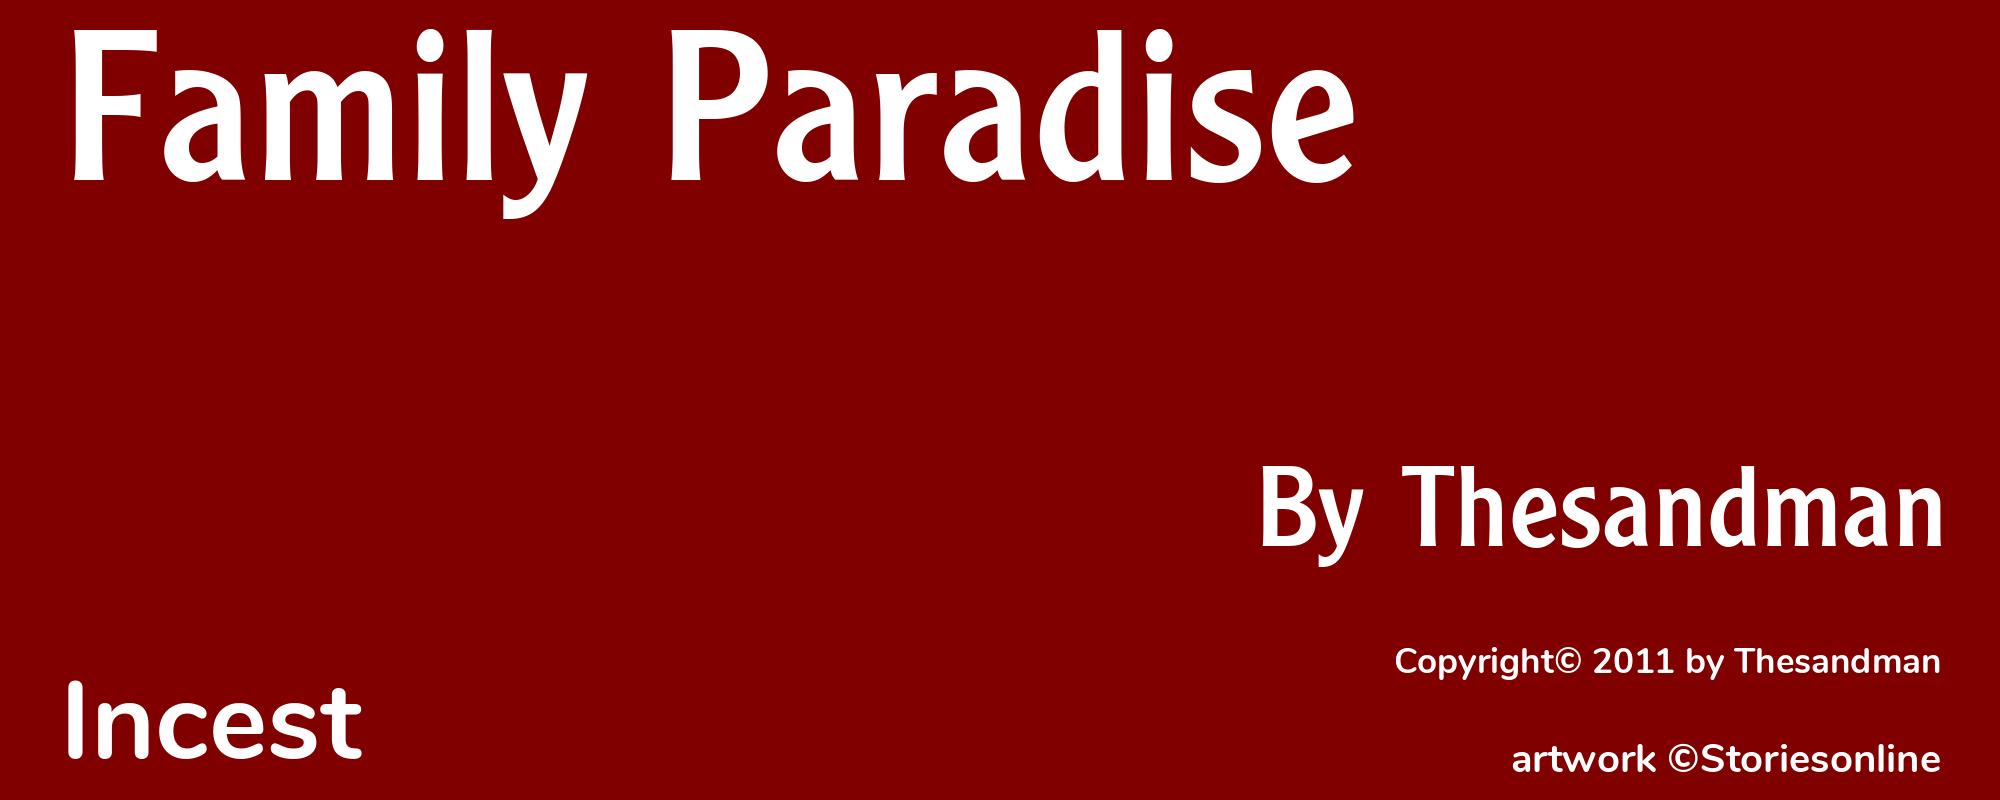 Family Paradise - Cover